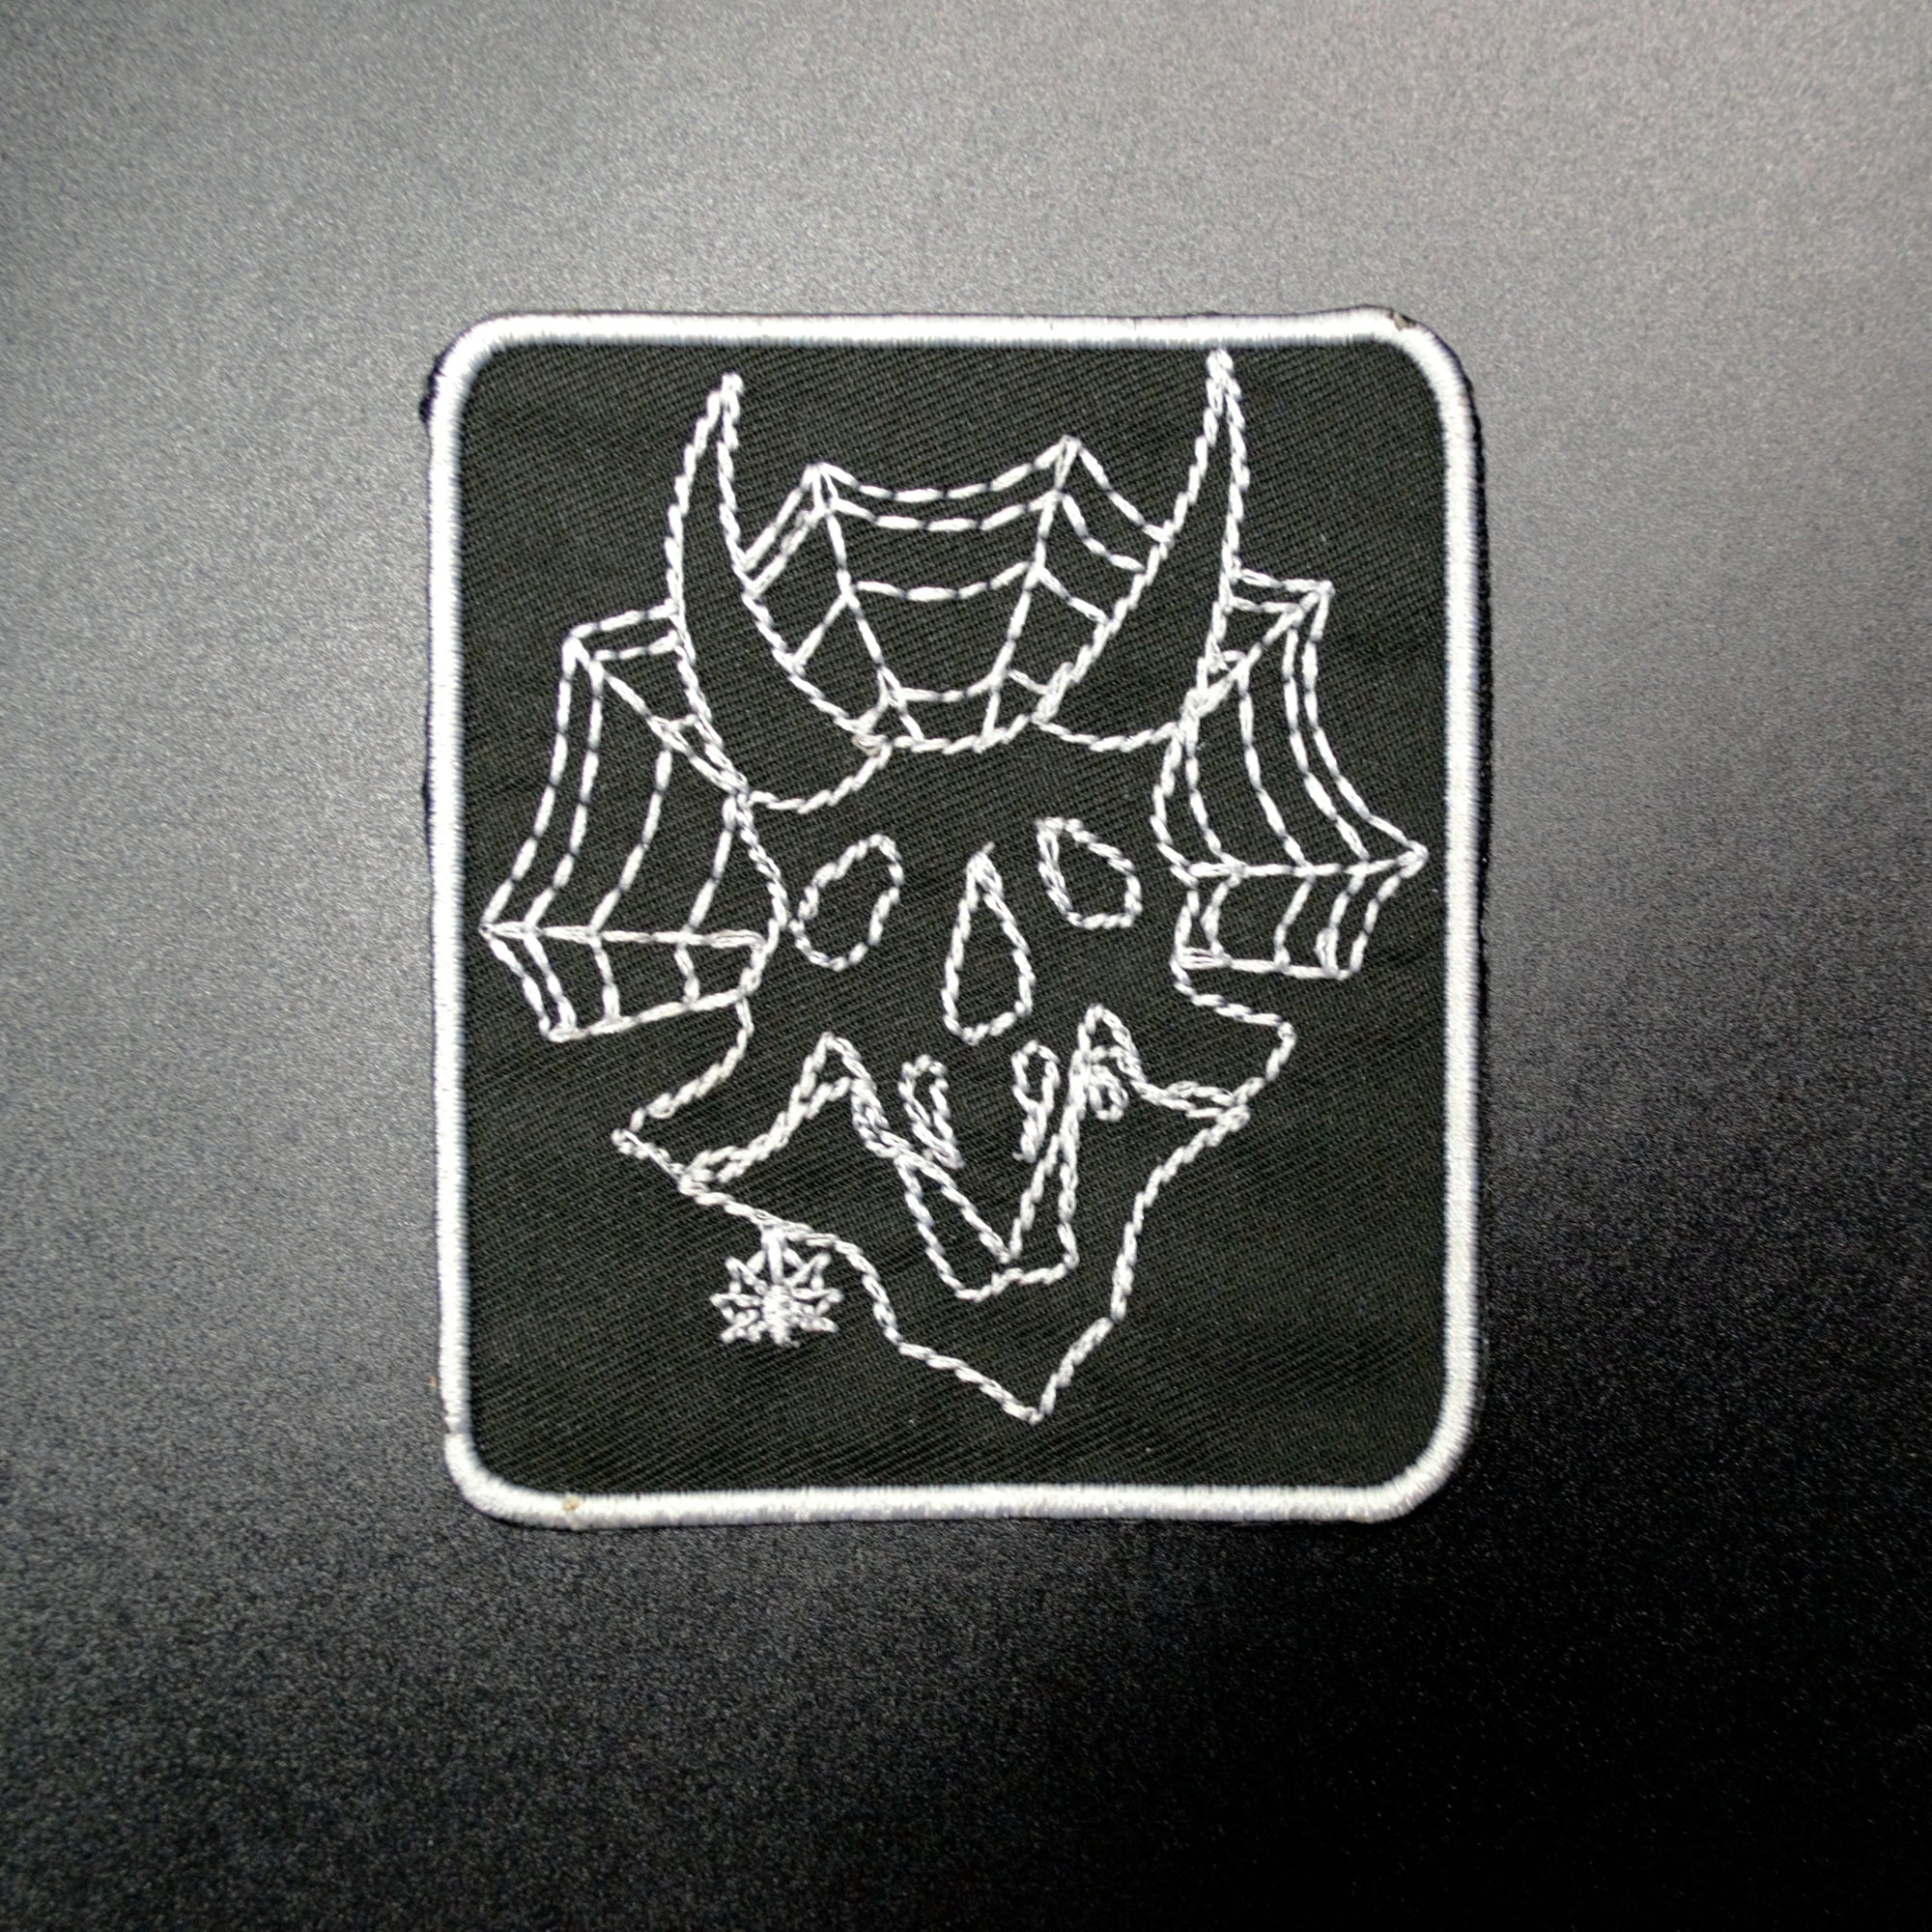 triceratops bone fossil patch